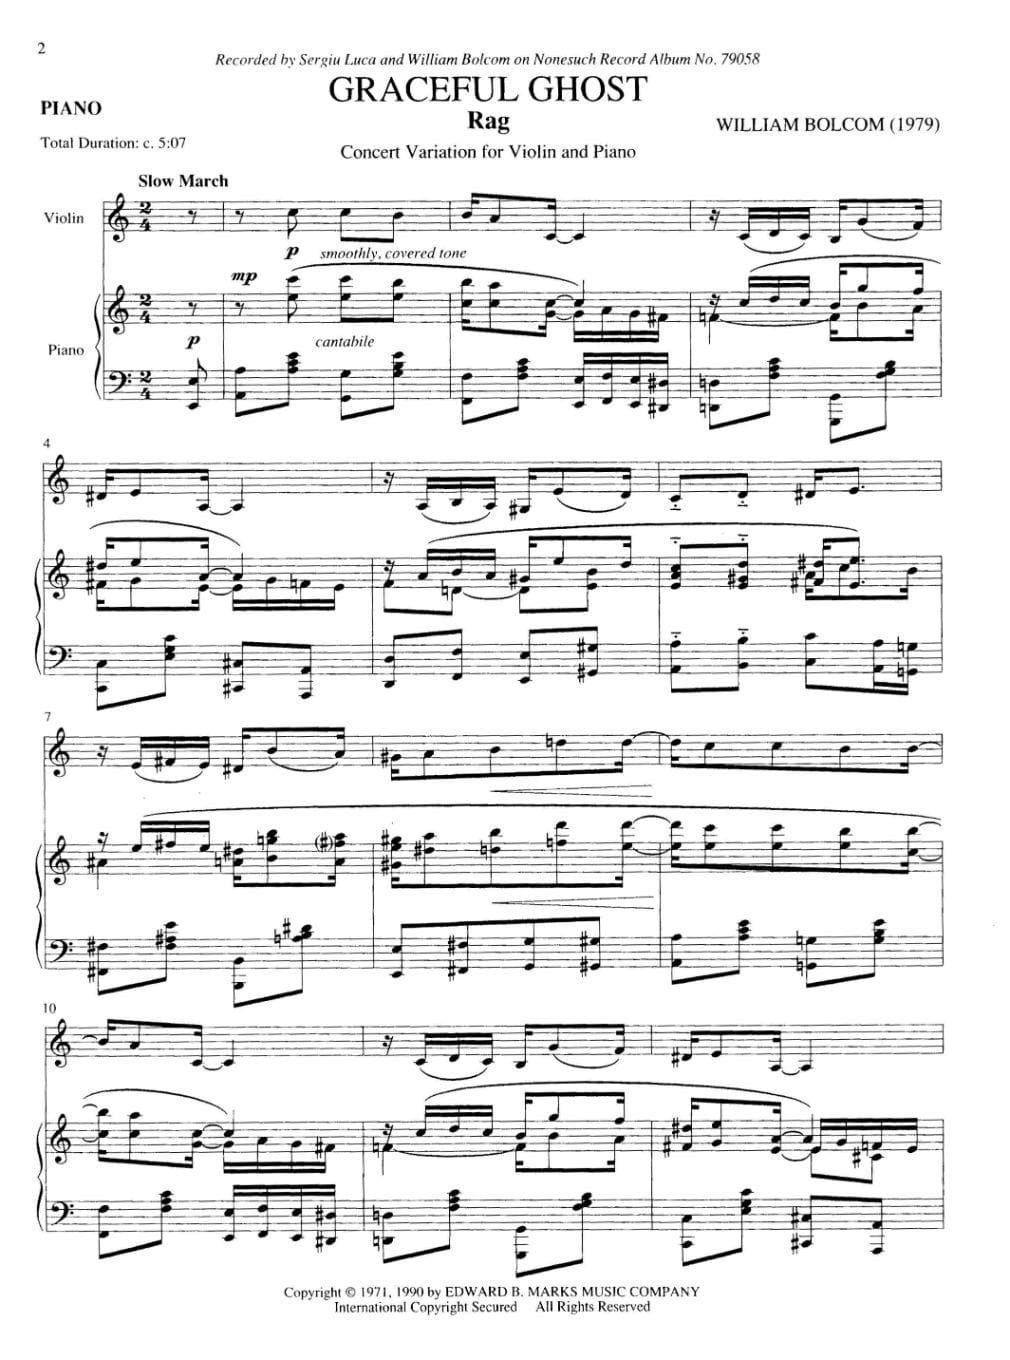 Bolcom, William - Graceful Ghost Rag Concert Variation for Violin and Piano - published by Edward B Marks Music